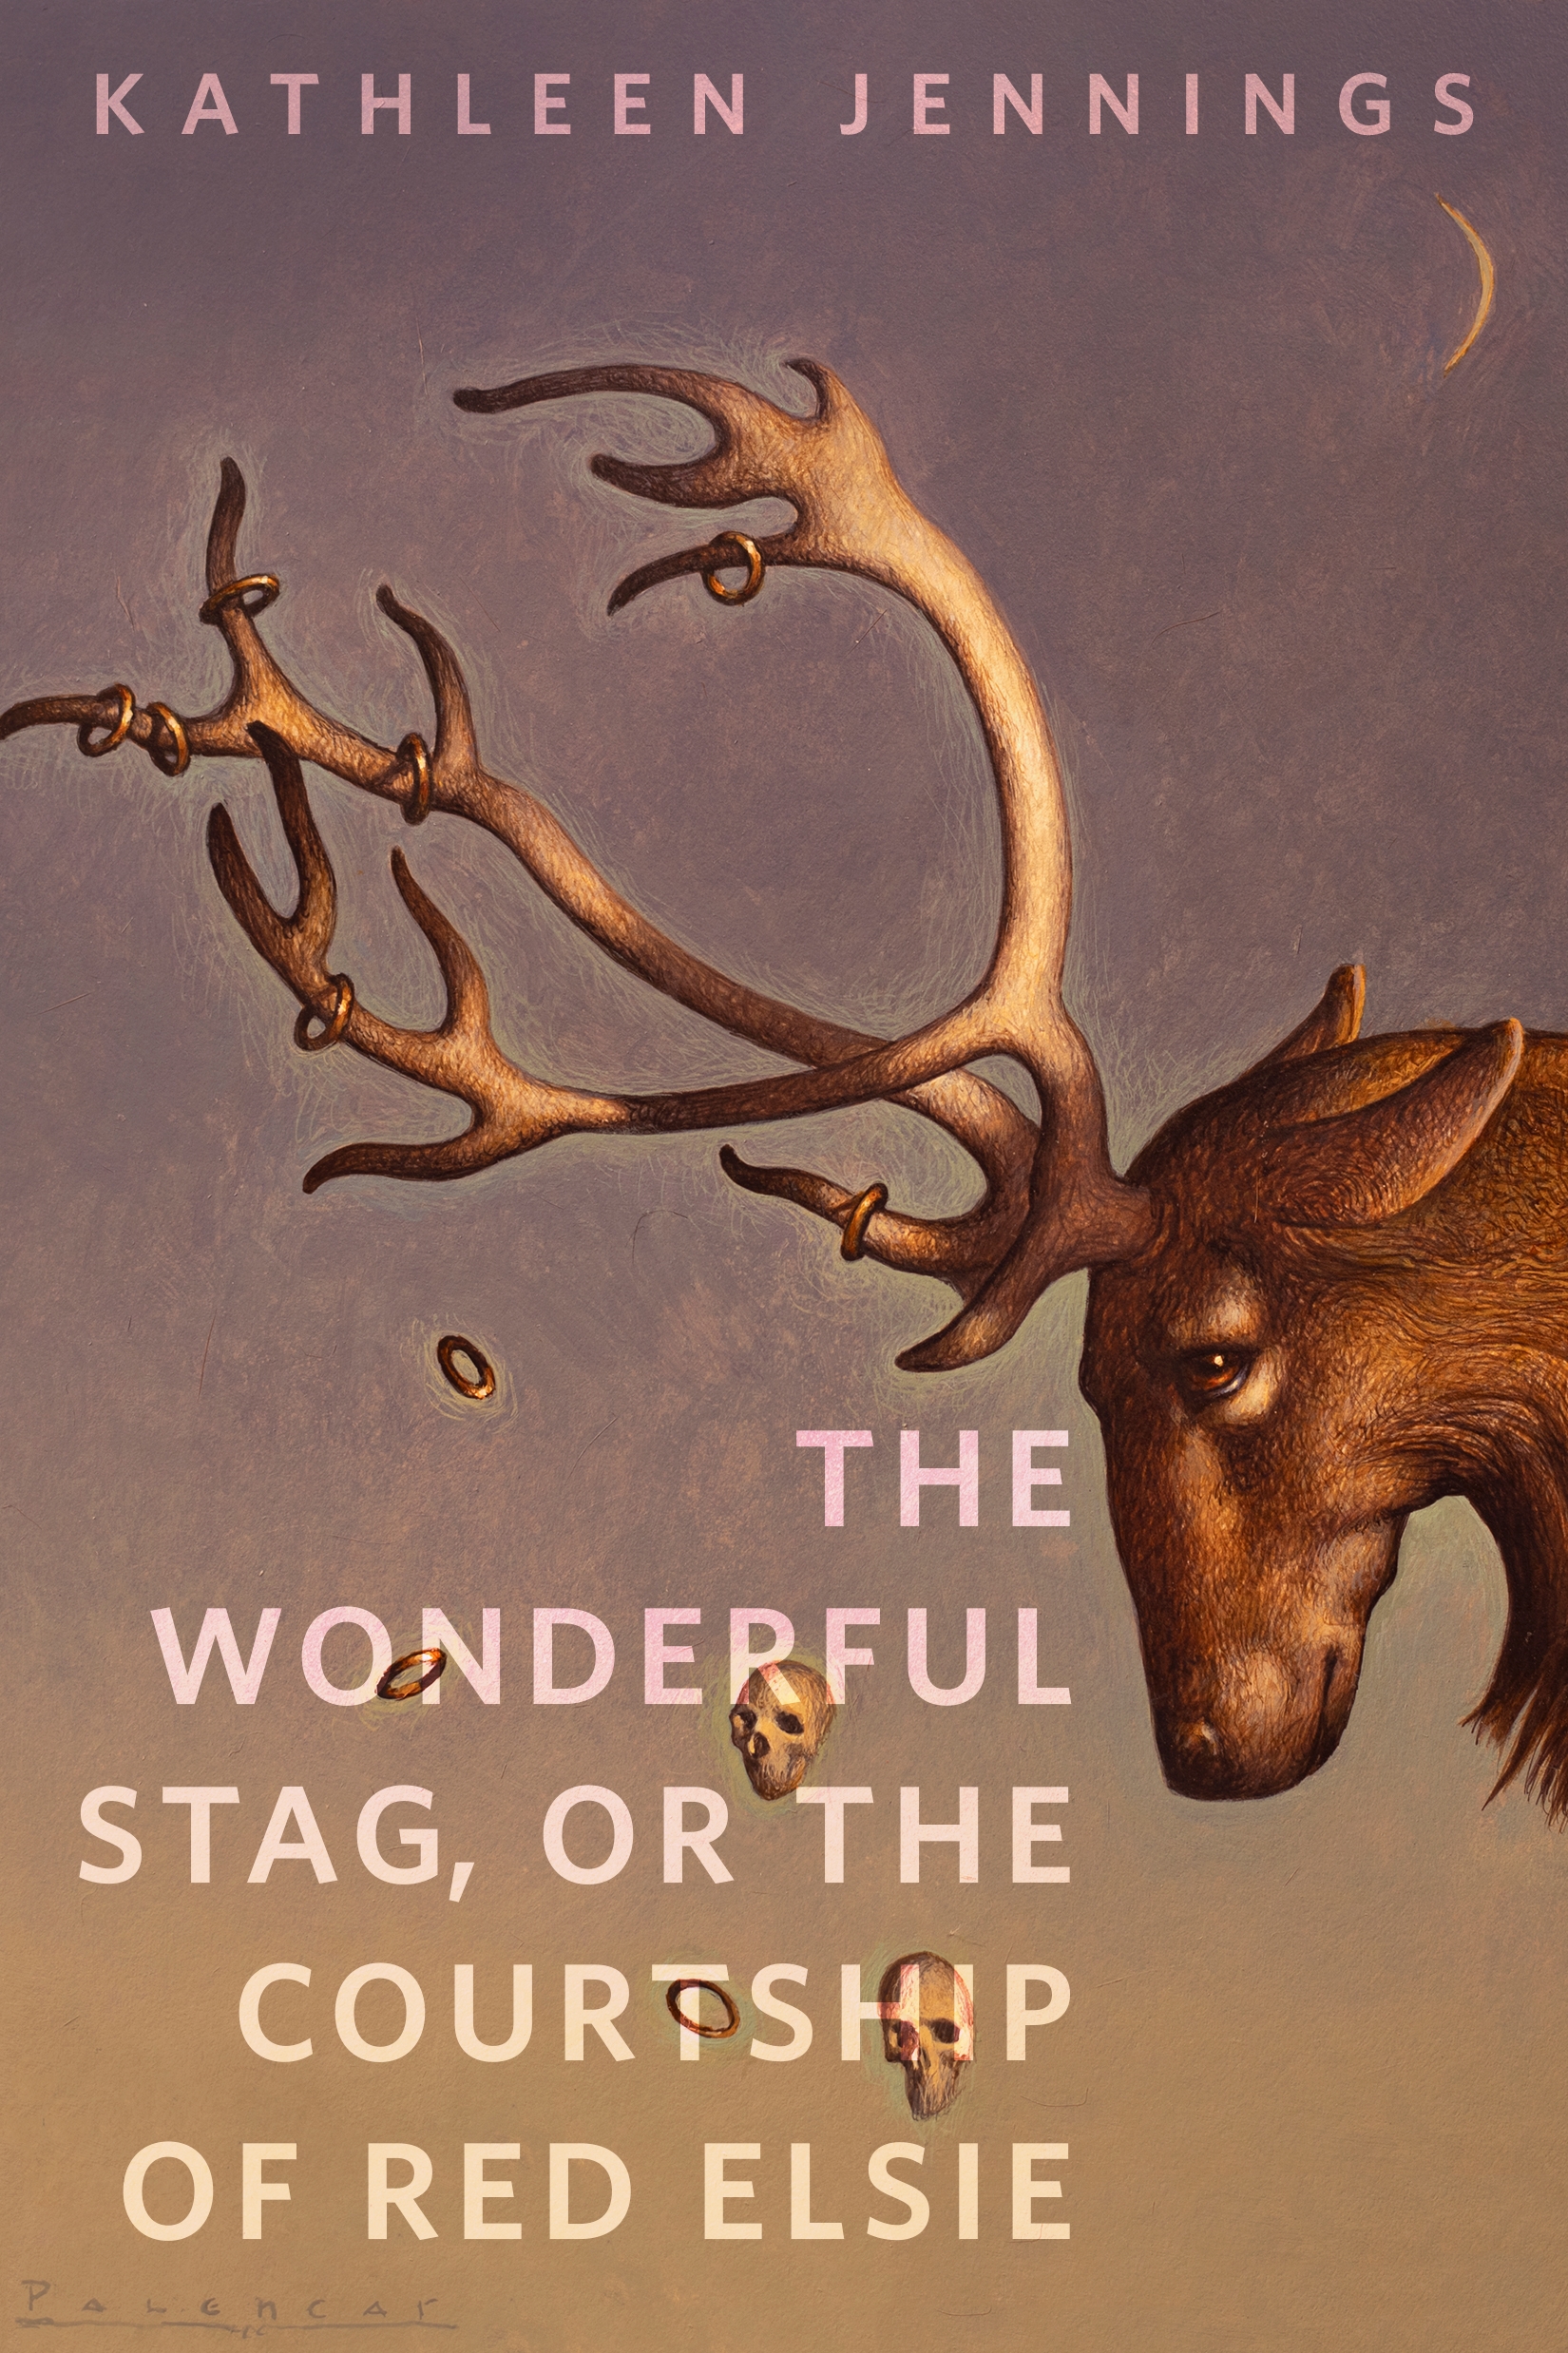 The Wonderful Stag, or The Courtship of Red Elsie : A Tor.com Original by Kathleen Jennings